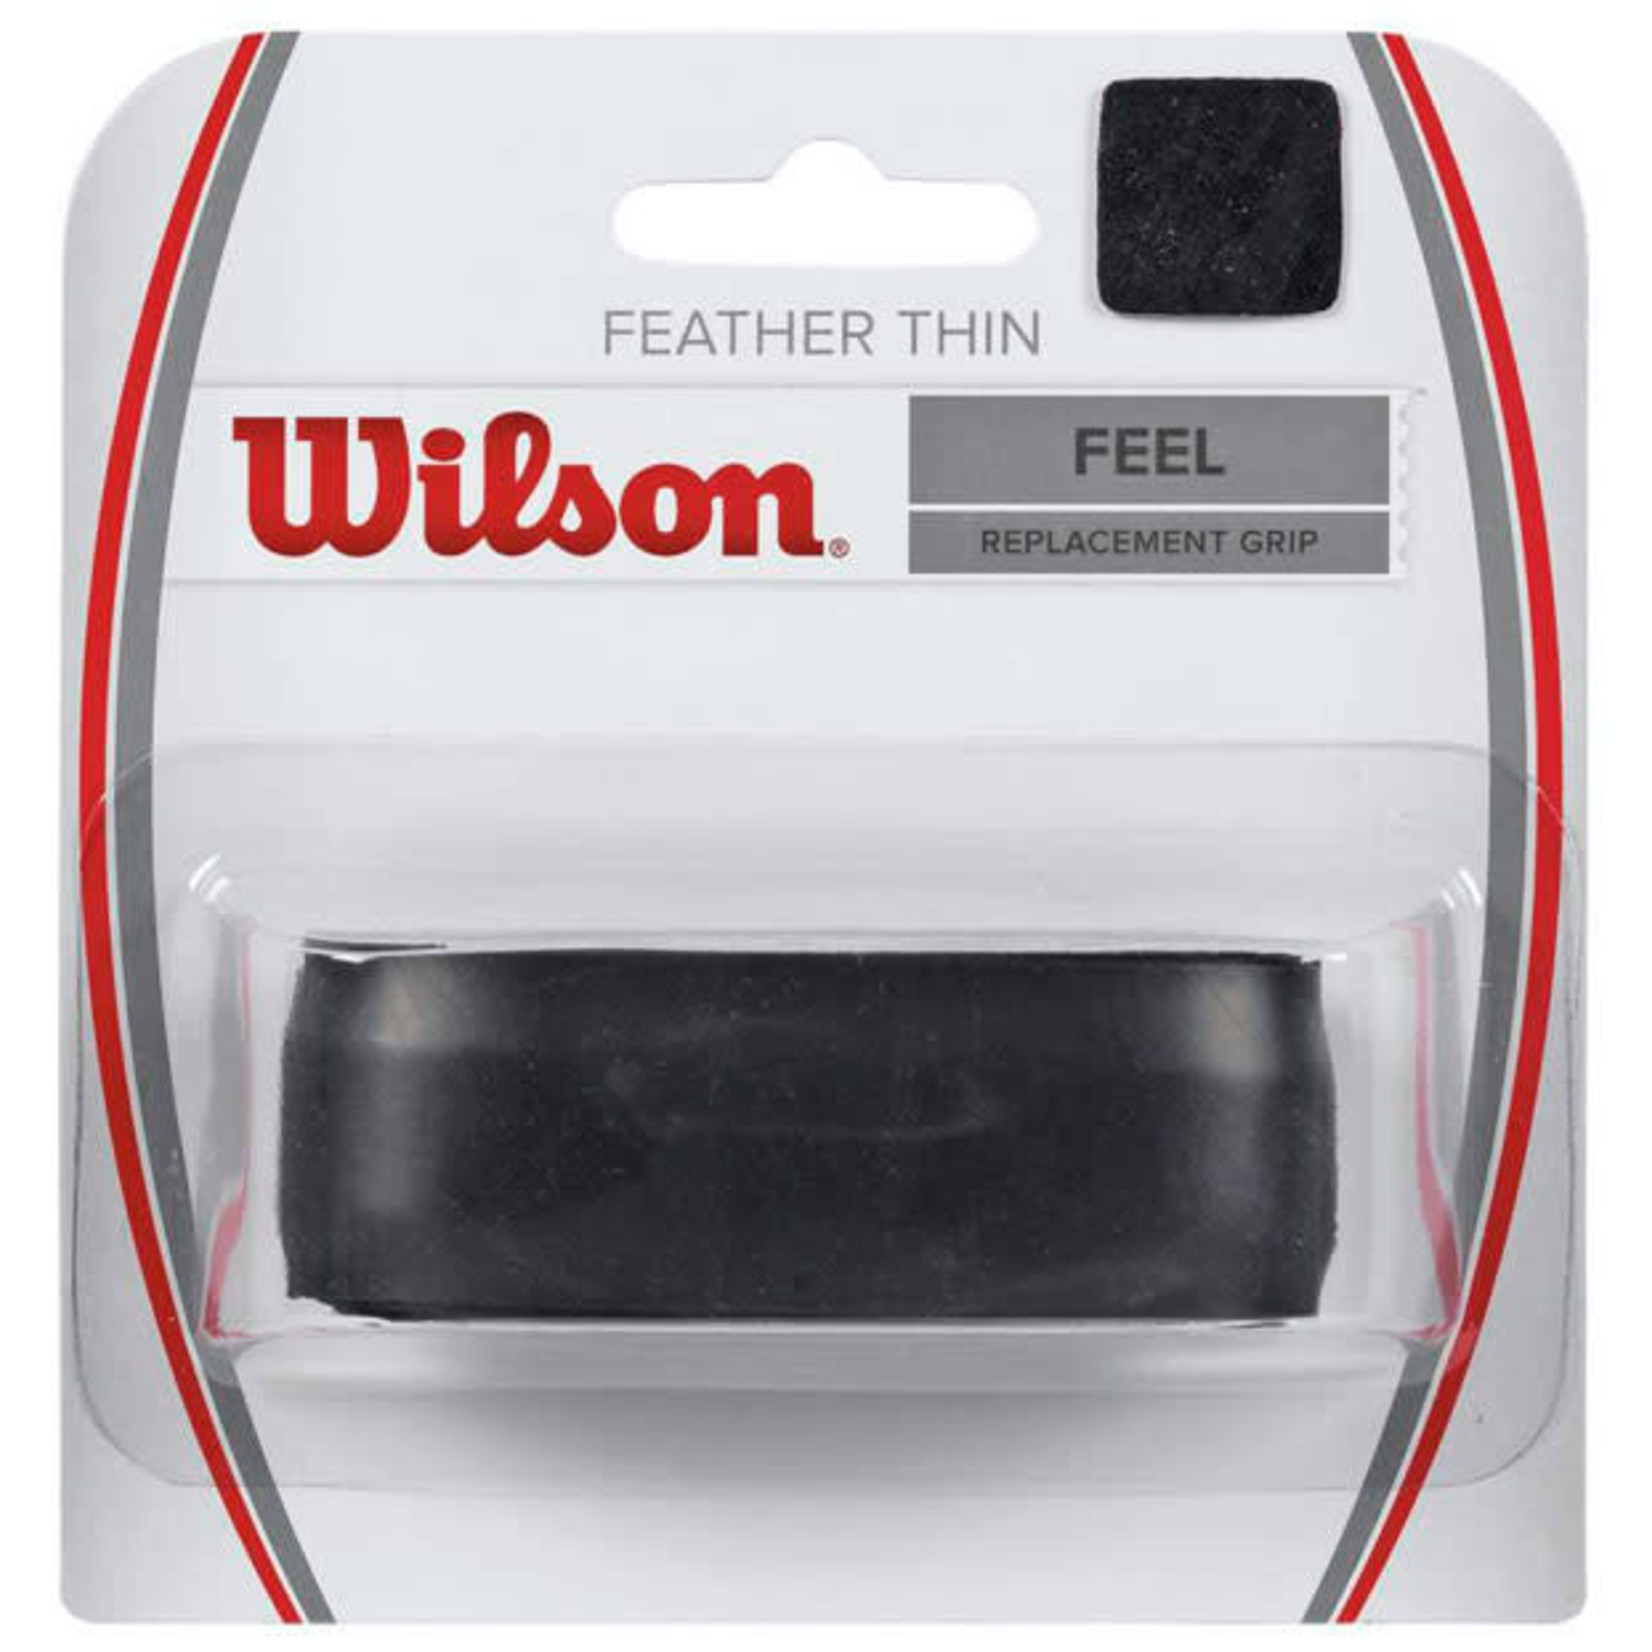 Wilson Wilson Feather Thin Replacement Grips